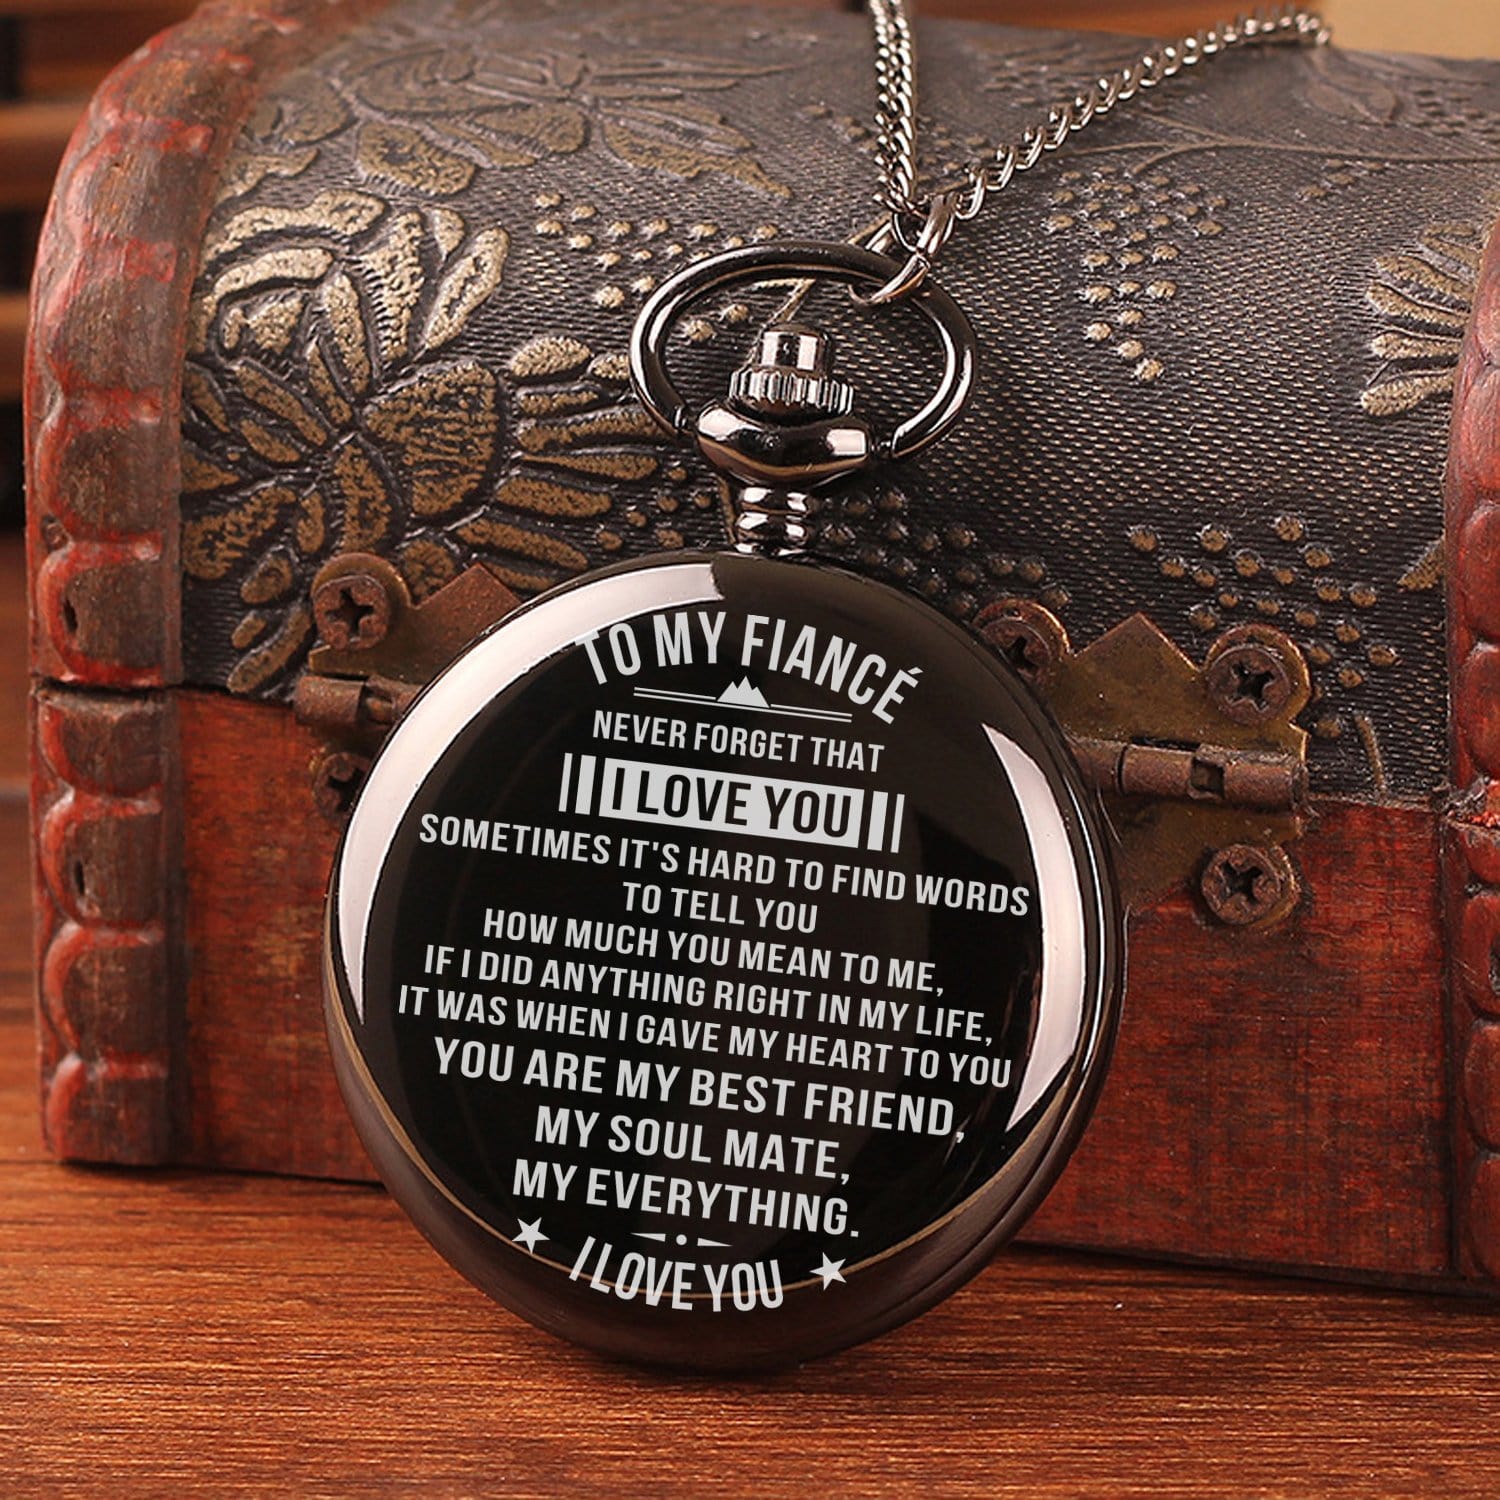 Pocket Watches To My Fiance - You Are My Everything Pocket Watch GiveMe-Gifts